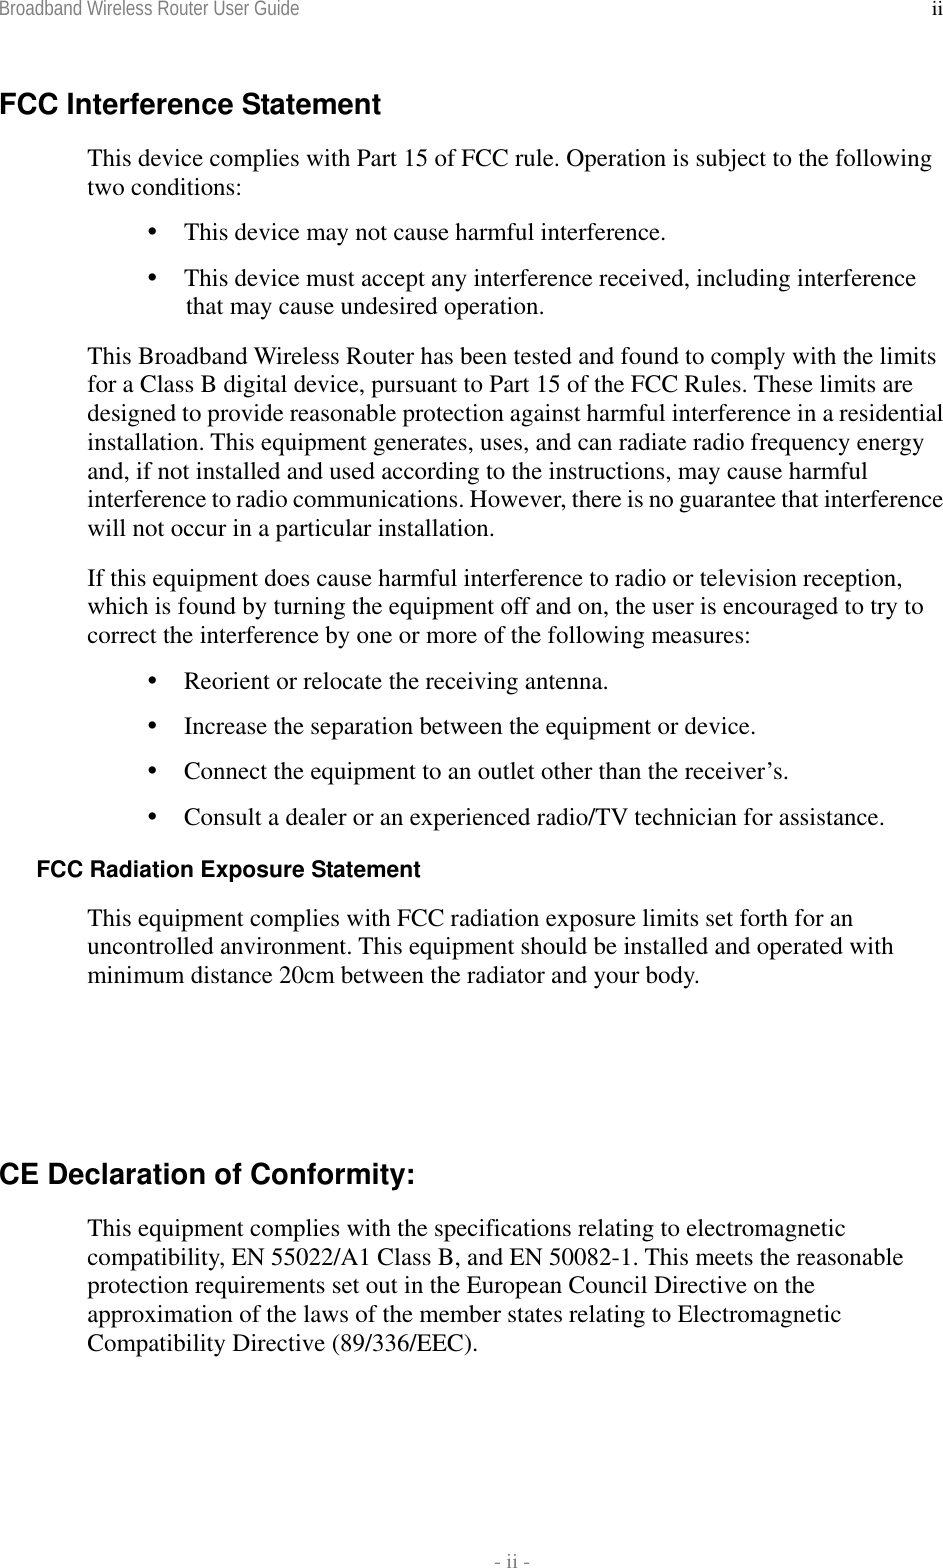 Broadband Wireless Router User Guide    - ii - iiFCC Interference Statement This device complies with Part 15 of FCC rule. Operation is subject to the following two conditions:  This device may not cause harmful interference.  This device must accept any interference received, including interference that may cause undesired operation. This Broadband Wireless Router has been tested and found to comply with the limits for a Class B digital device, pursuant to Part 15 of the FCC Rules. These limits are designed to provide reasonable protection against harmful interference in a residential installation. This equipment generates, uses, and can radiate radio frequency energy and, if not installed and used according to the instructions, may cause harmful interference to radio communications. However, there is no guarantee that interference will not occur in a particular installation. If this equipment does cause harmful interference to radio or television reception, which is found by turning the equipment off and on, the user is encouraged to try to correct the interference by one or more of the following measures:  Reorient or relocate the receiving antenna.  Increase the separation between the equipment or device.  Connect the equipment to an outlet other than the receiver’s.  Consult a dealer or an experienced radio/TV technician for assistance. FCC Radiation Exposure Statement This equipment complies with FCC radiation exposure limits set forth for an uncontrolled anvironment. This equipment should be installed and operated with minimum distance 20cm between the radiator and your body.     CE Declaration of Conformity: This equipment complies with the specifications relating to electromagnetic compatibility, EN 55022/A1 Class B, and EN 50082-1. This meets the reasonable protection requirements set out in the European Council Directive on the approximation of the laws of the member states relating to Electromagnetic Compatibility Directive (89/336/EEC).  